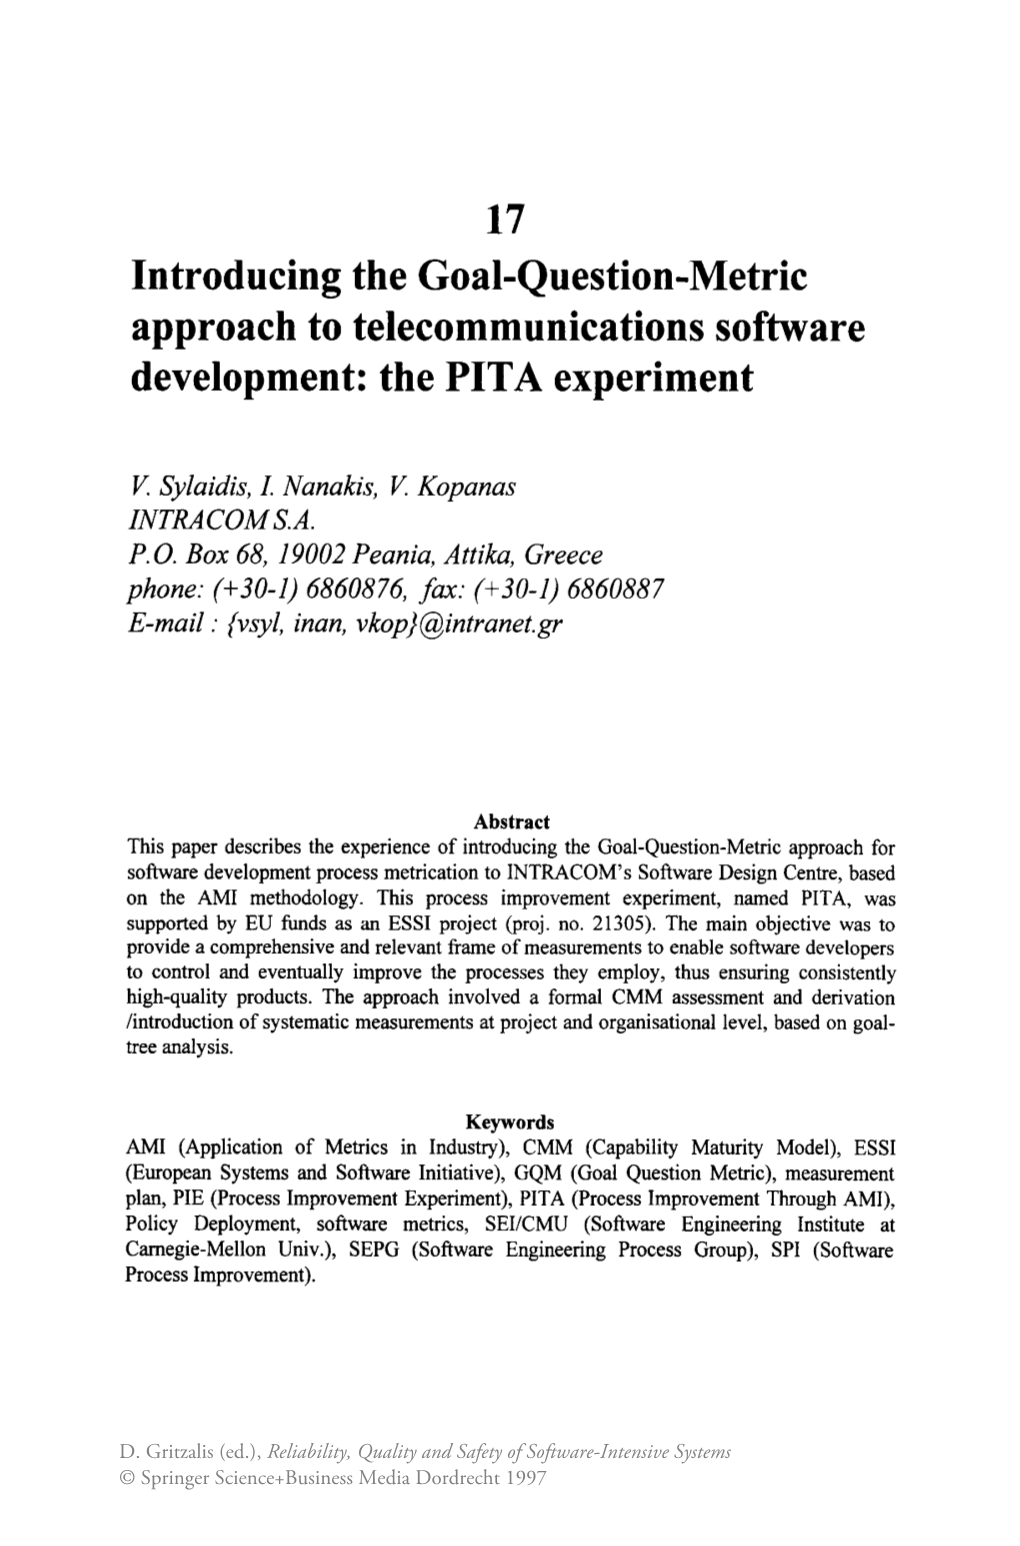 17 Introducing the Goal-Question-Metric Approach to Telecommunications Software Development: the PITA Experiment